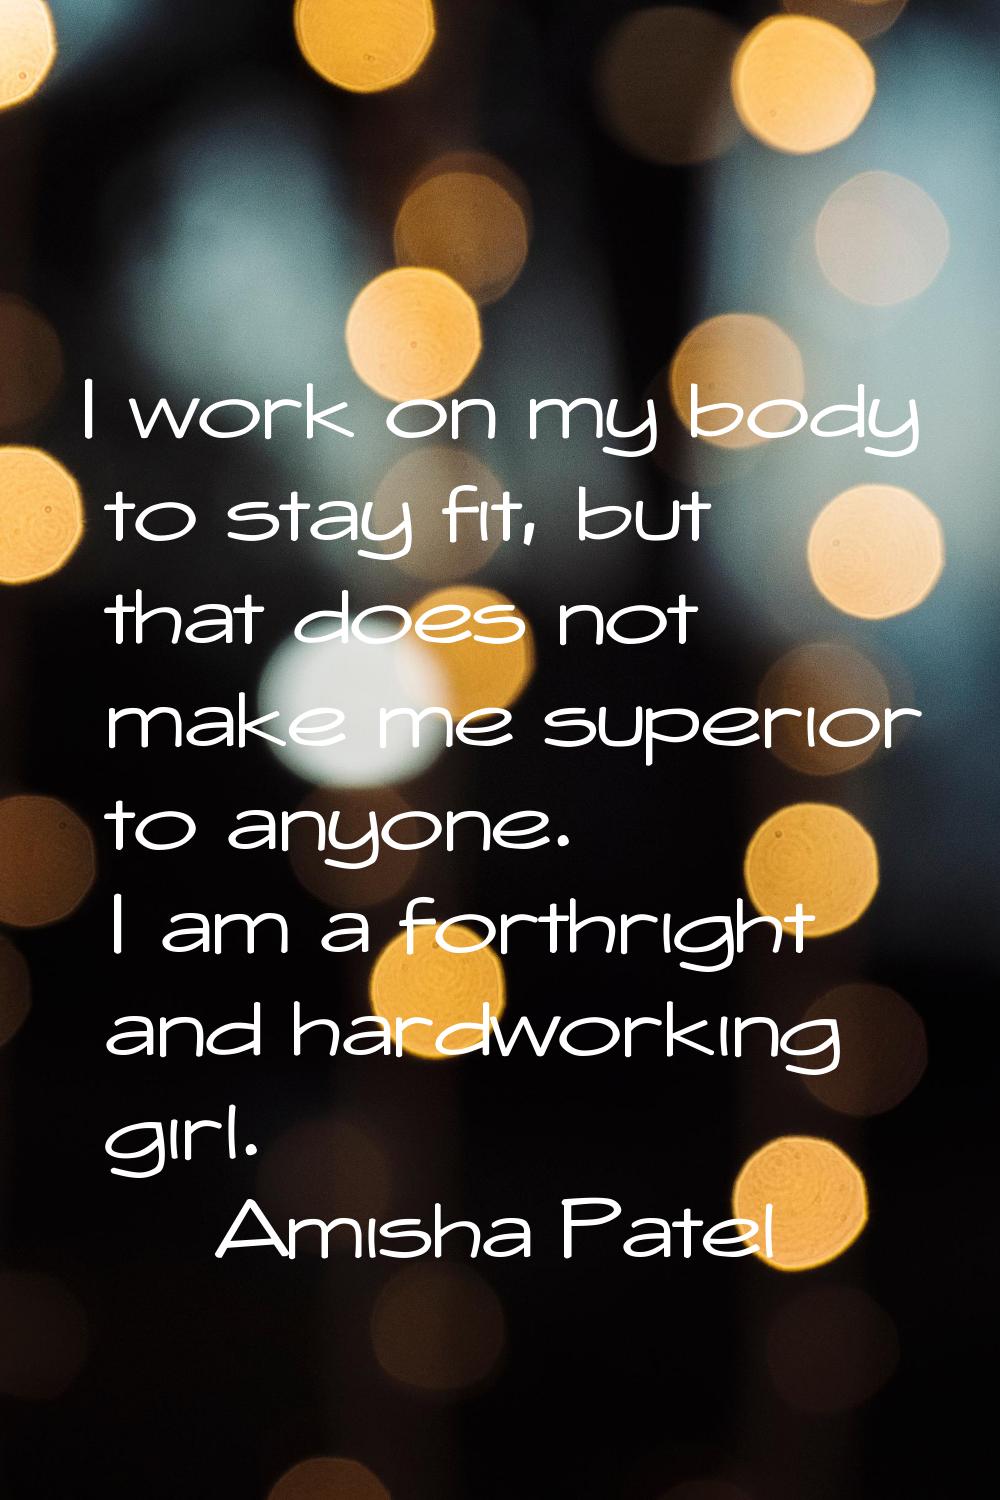 I work on my body to stay fit, but that does not make me superior to anyone. I am a forthright and 